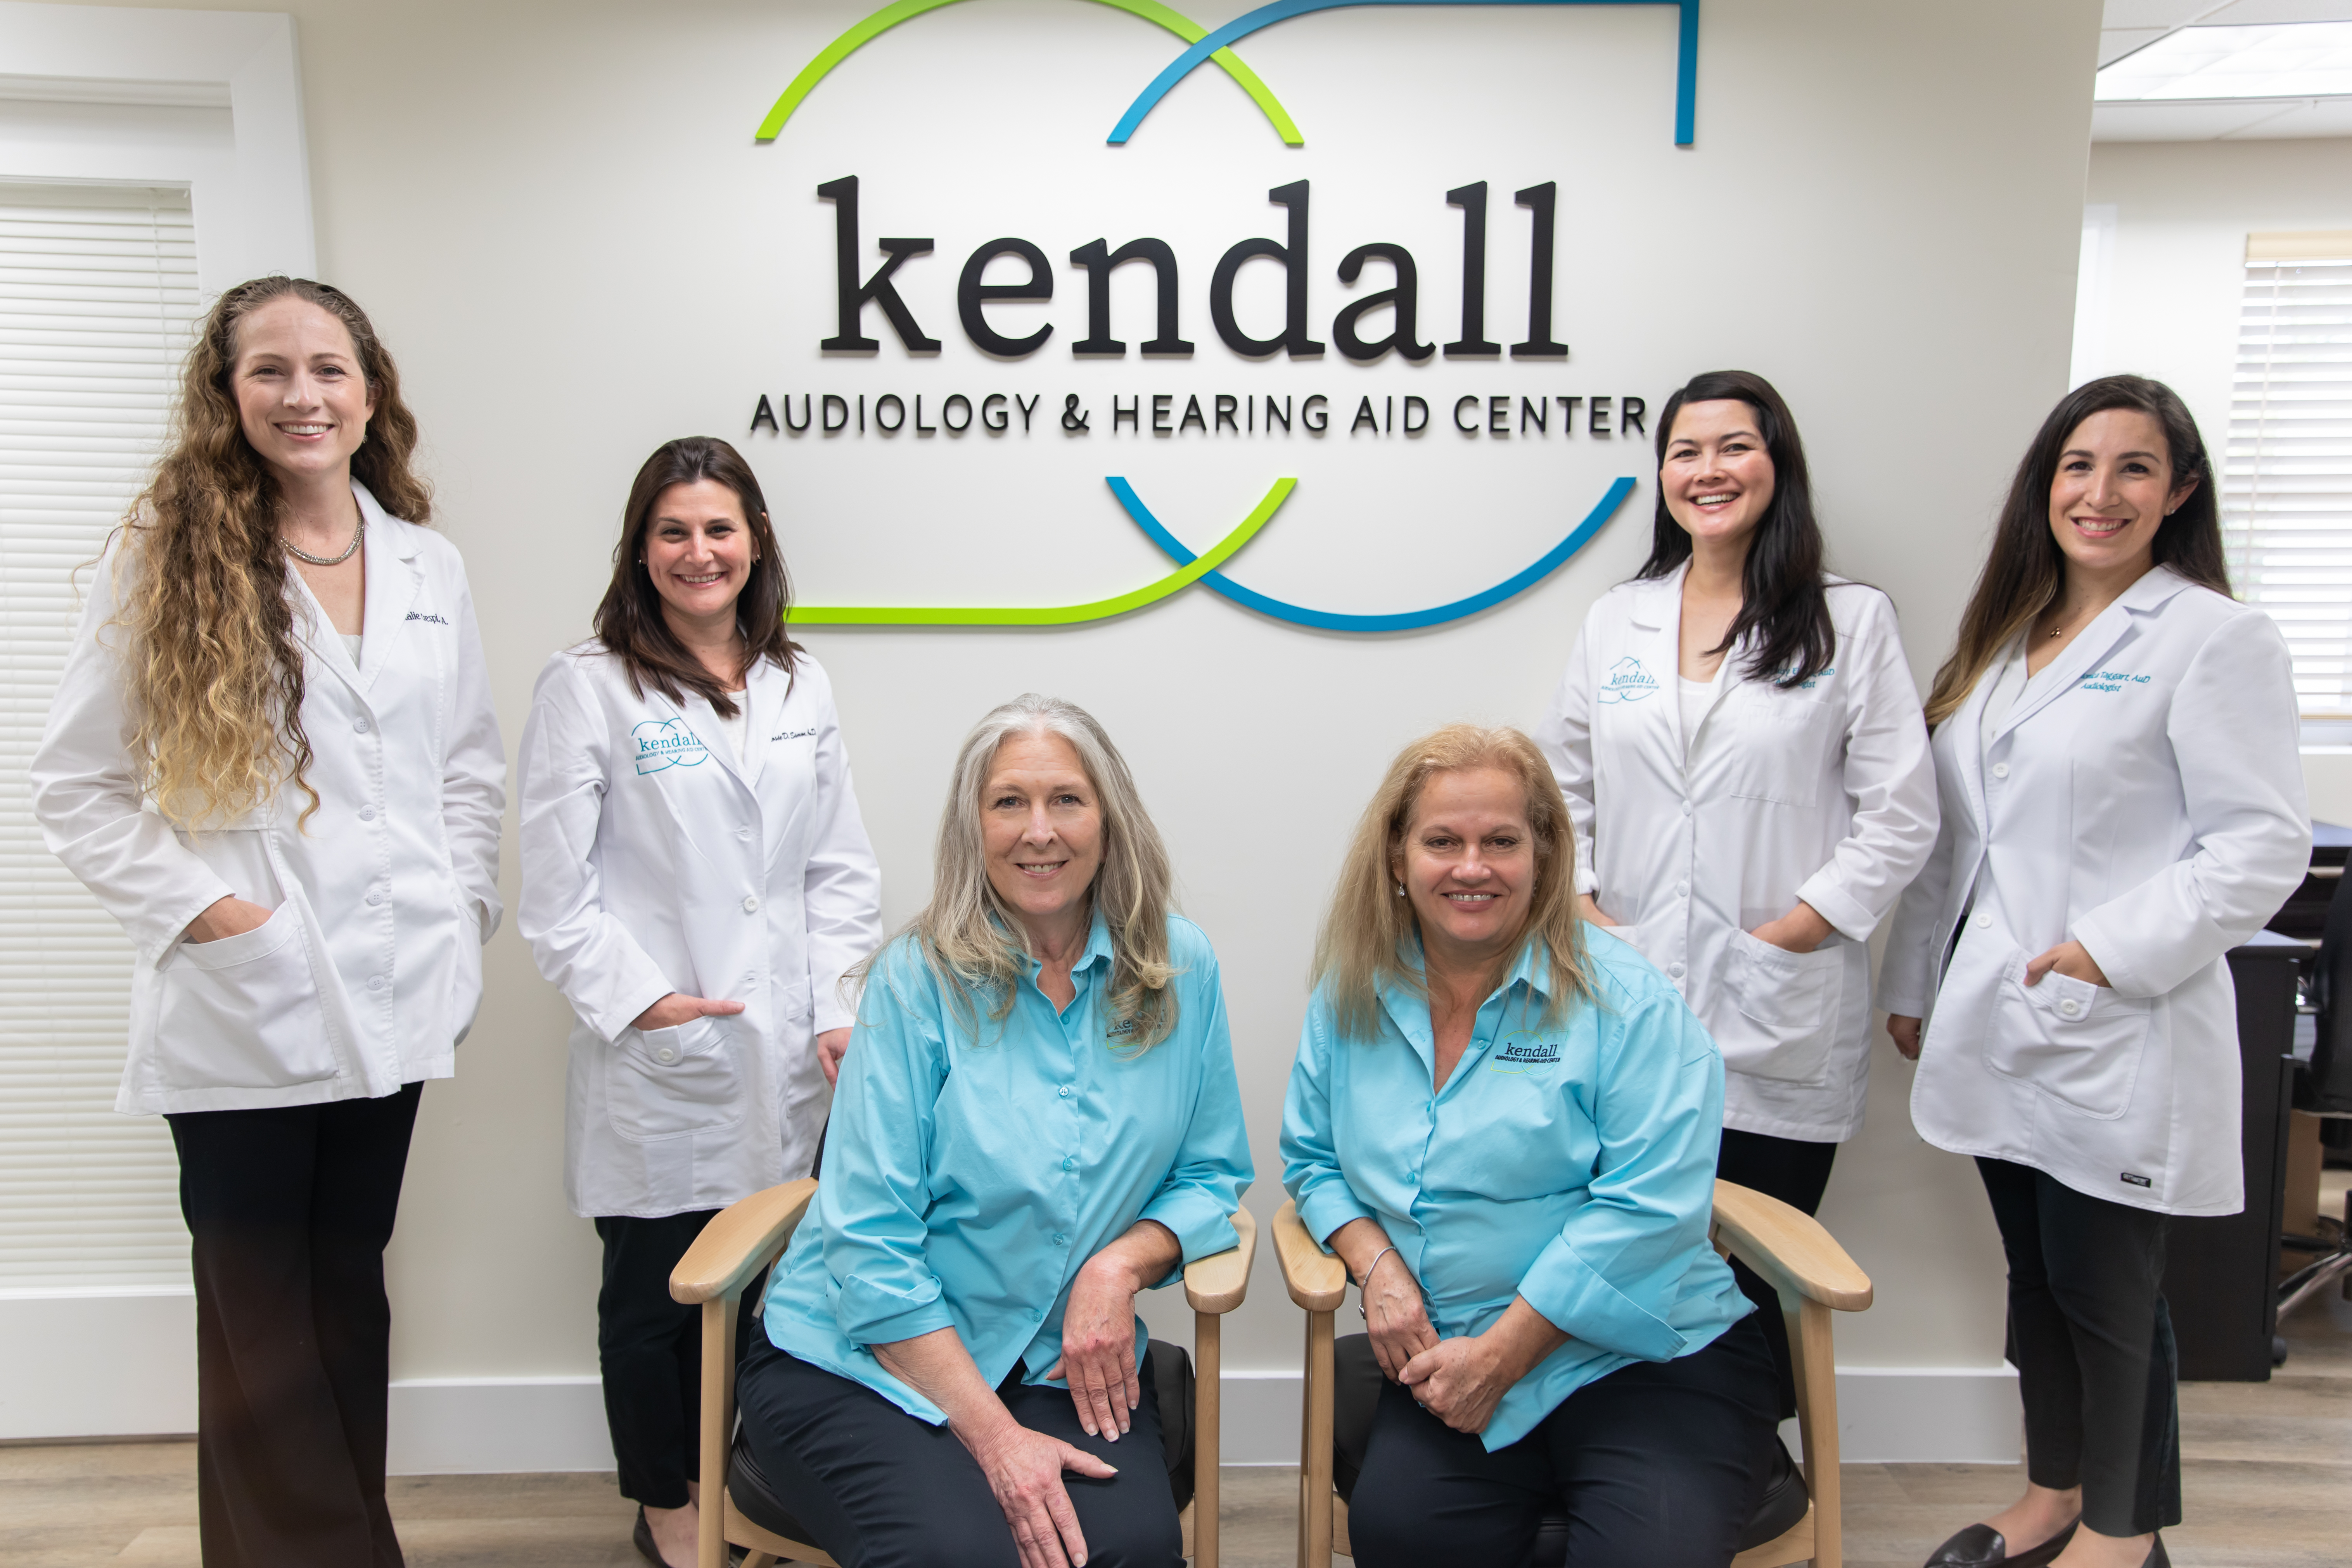 Kendall Audiology Staff group photo in Kendall, FL